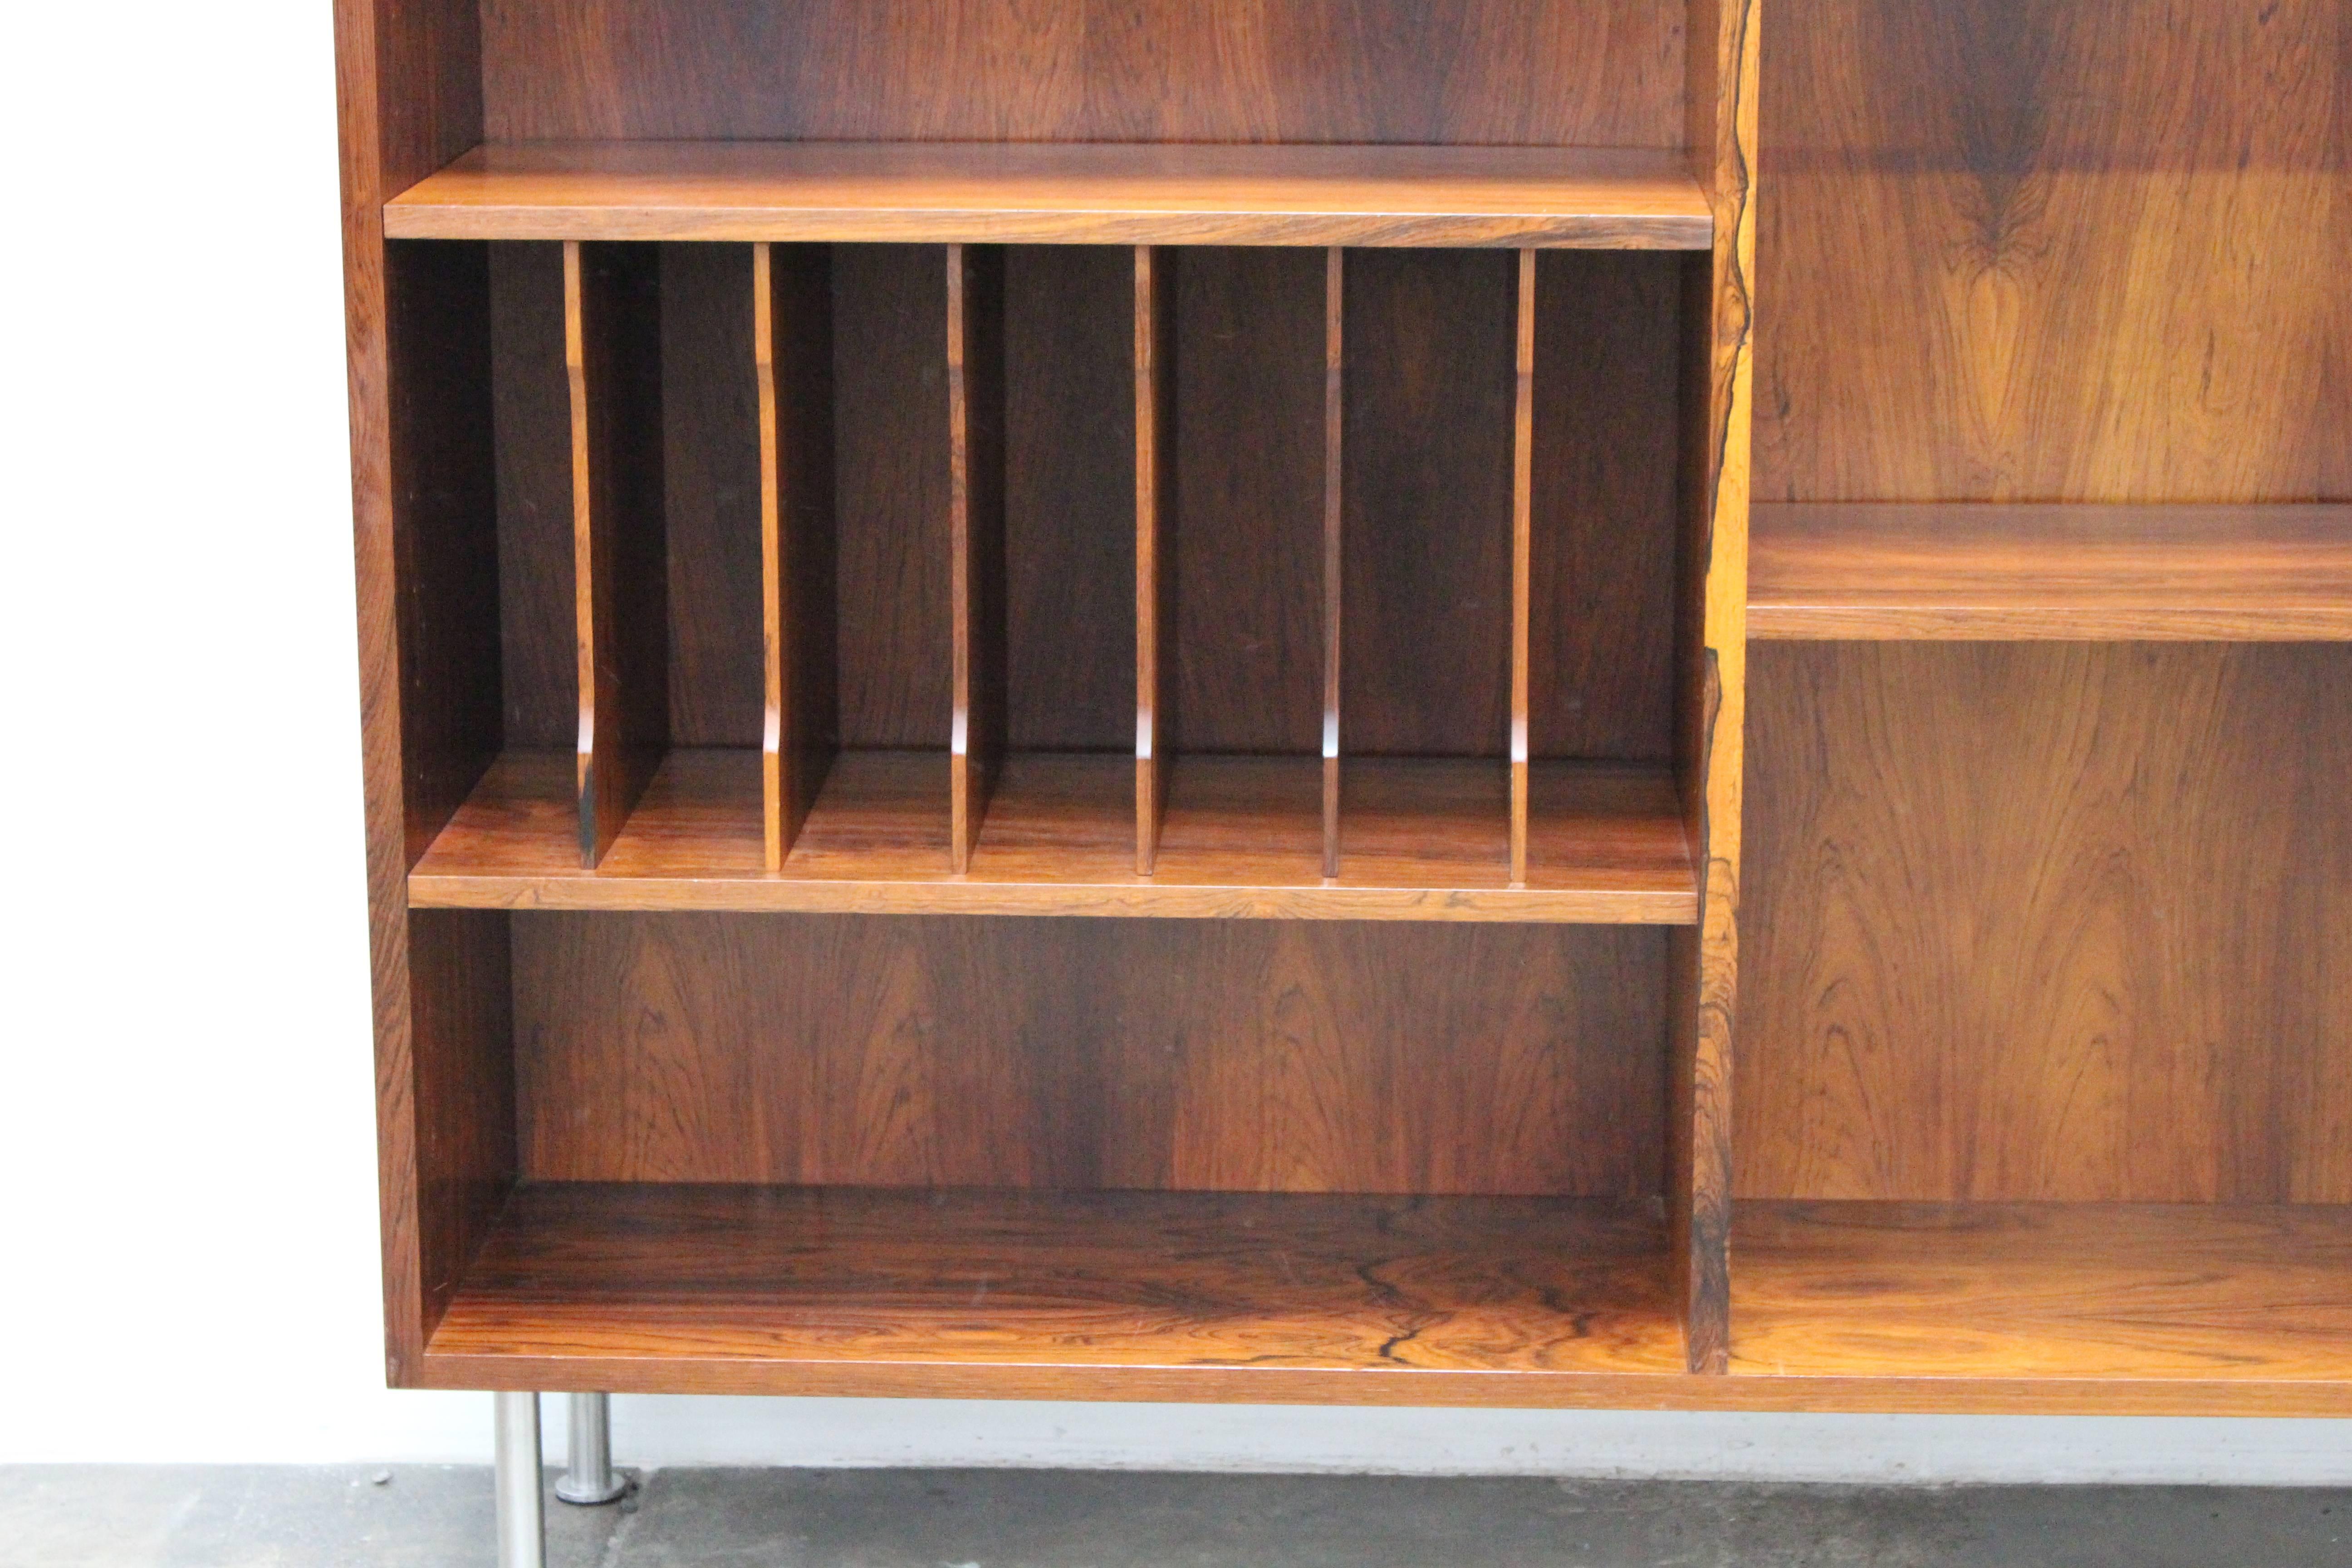 Rosewood Bookcase with Metal Legs, Danish Mid-Century Modern In Excellent Condition For Sale In Houston, TX